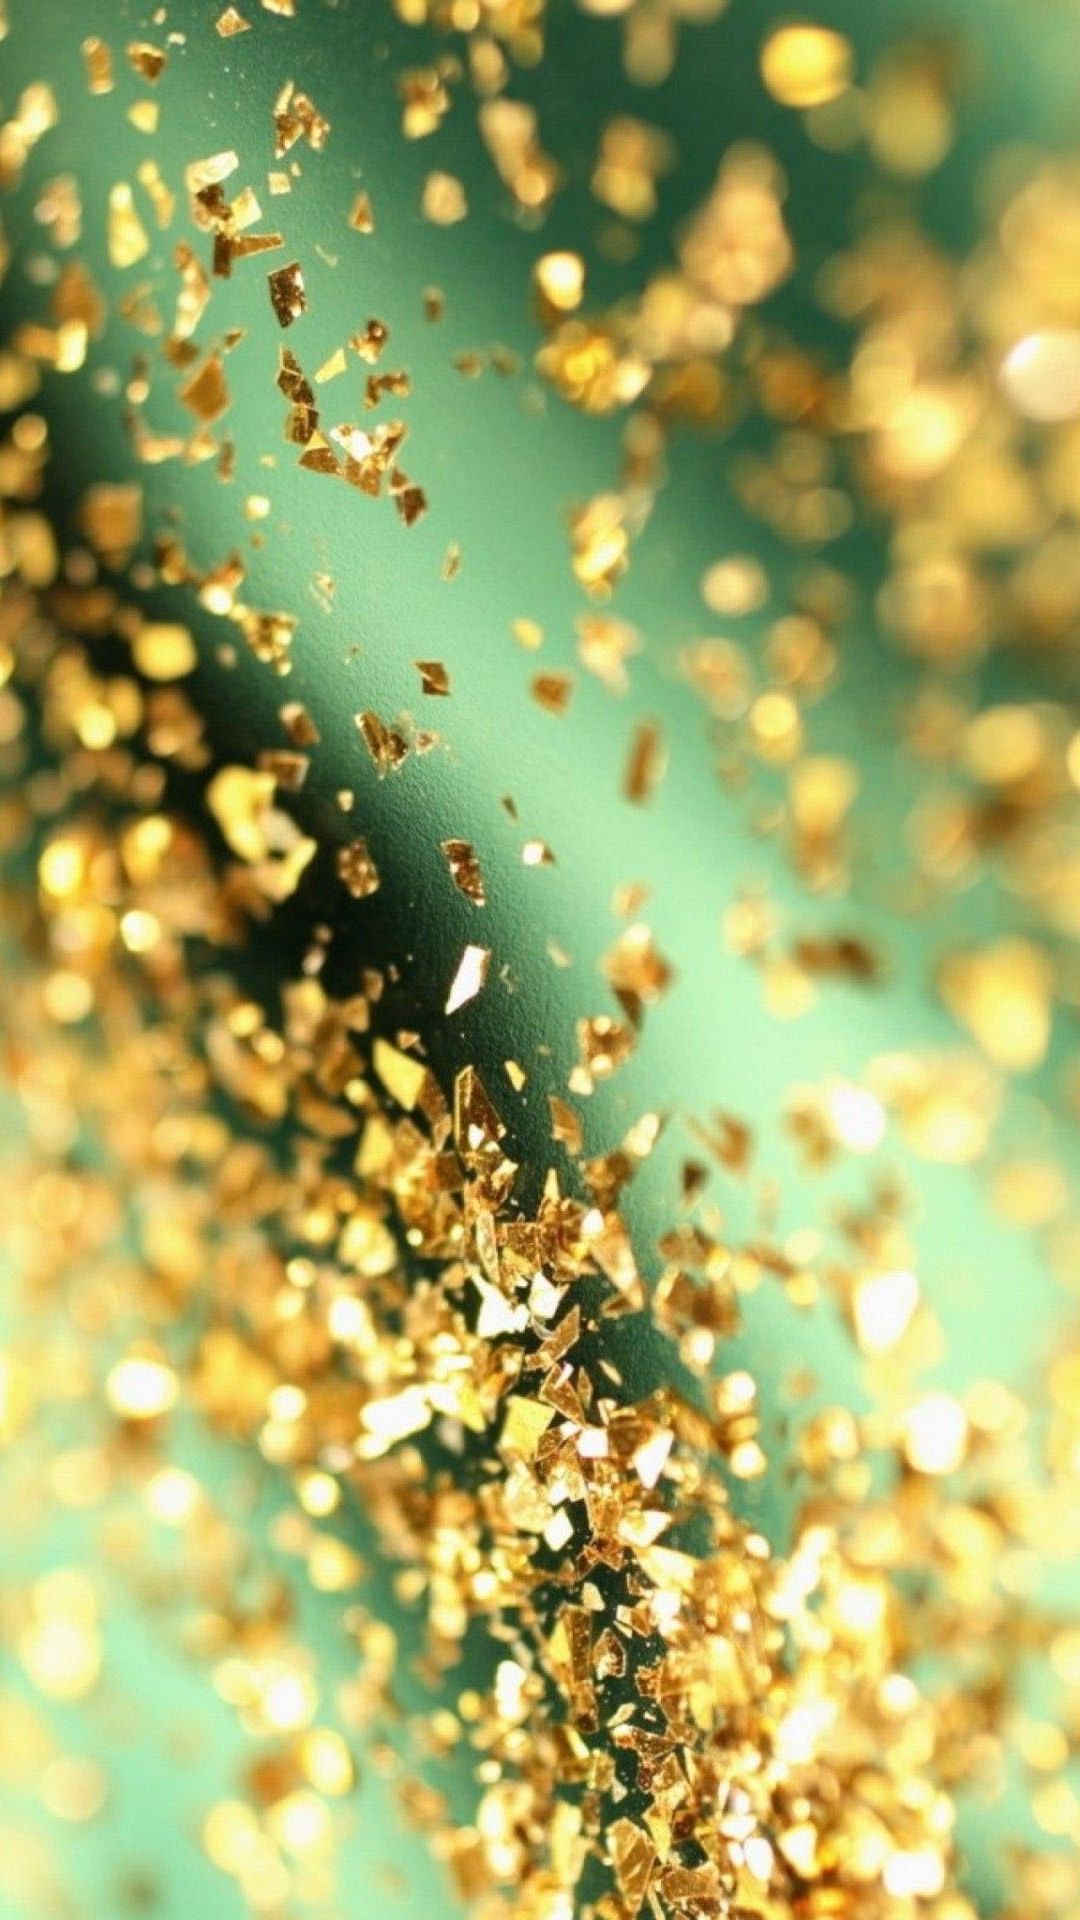 samsung gold wallpaper,water,glitter,turquoise,macro photography,close up